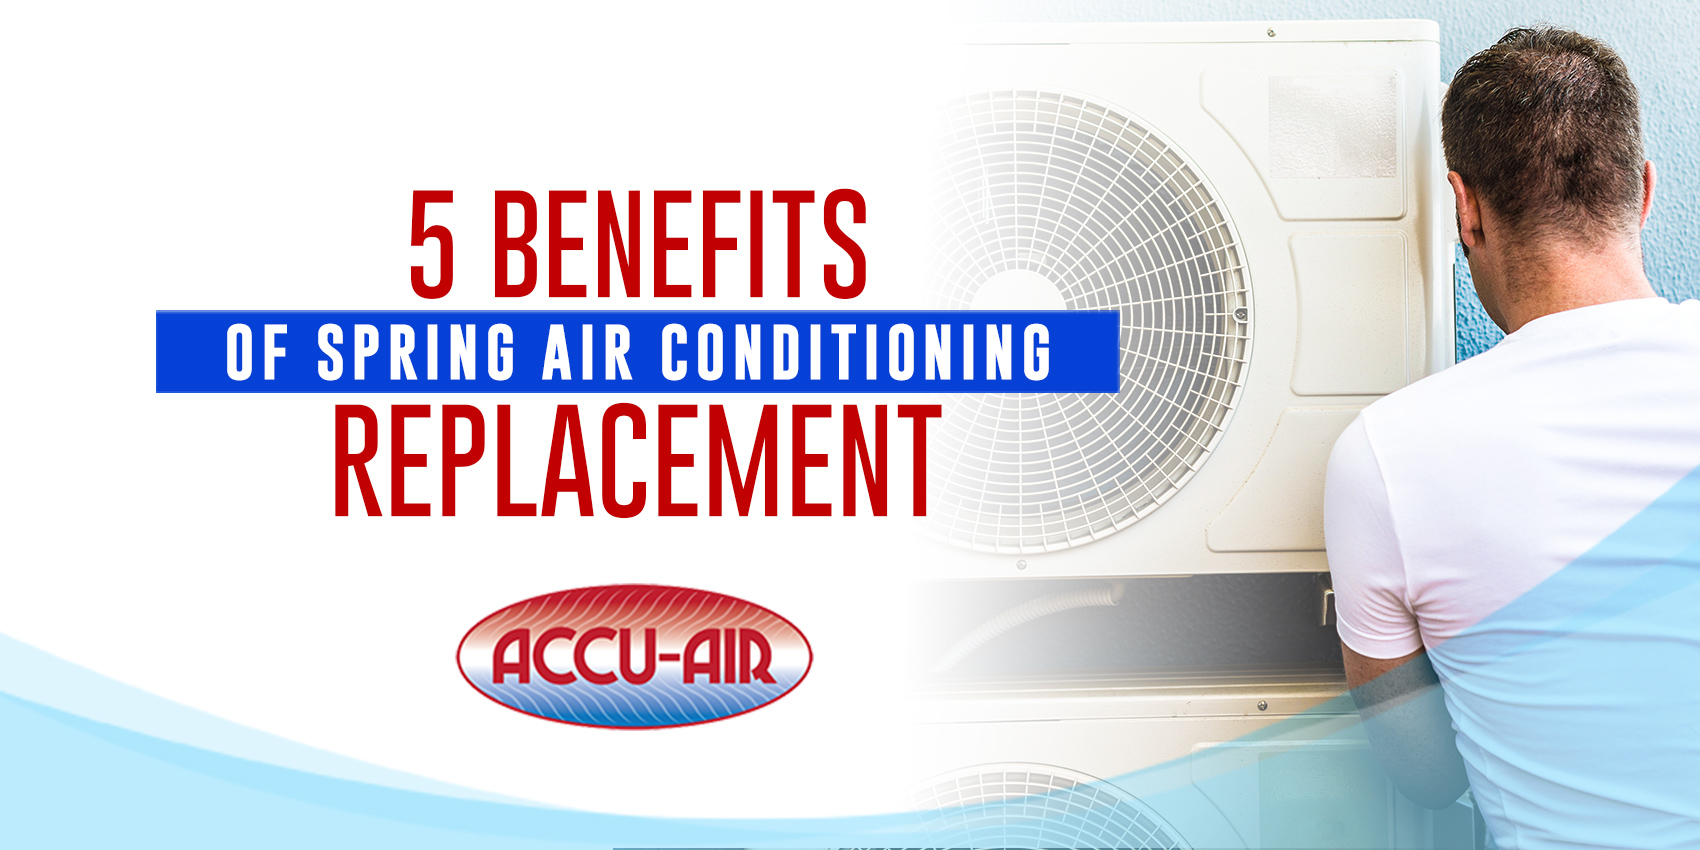 5 Benefits of Spring Air Conditioning Replacement